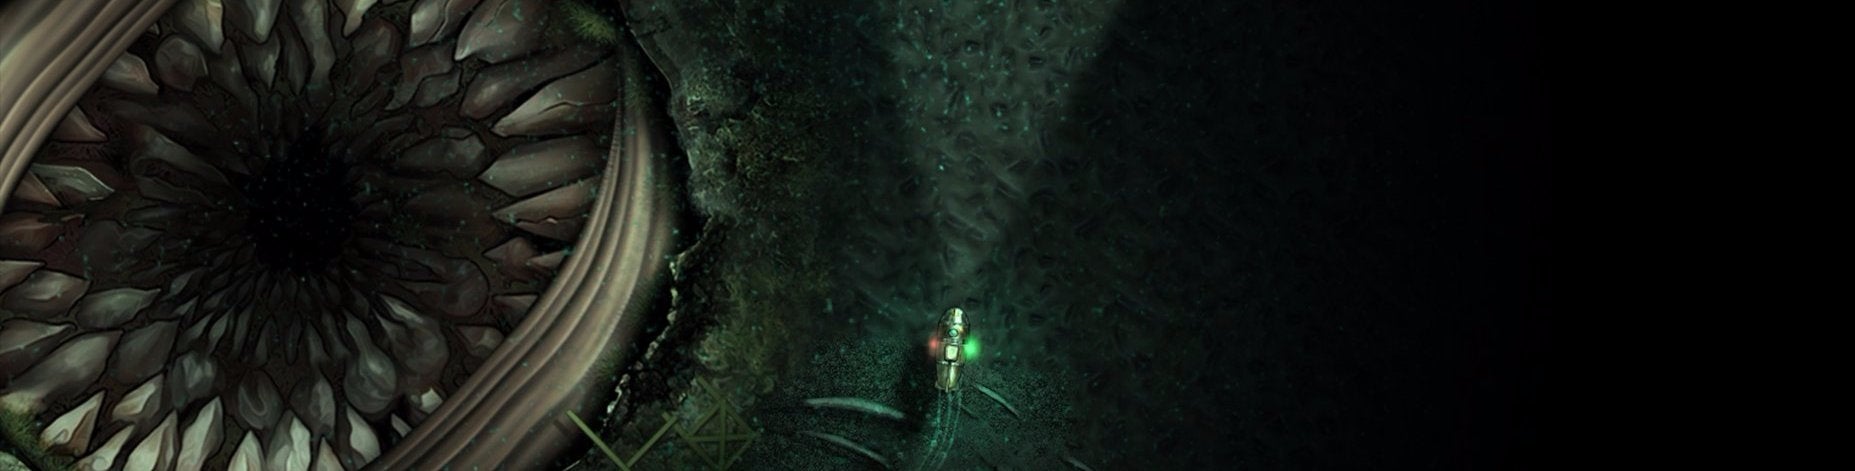 Image for Still out there: Failbetter Games talks Sunless Skies and Zubmariner